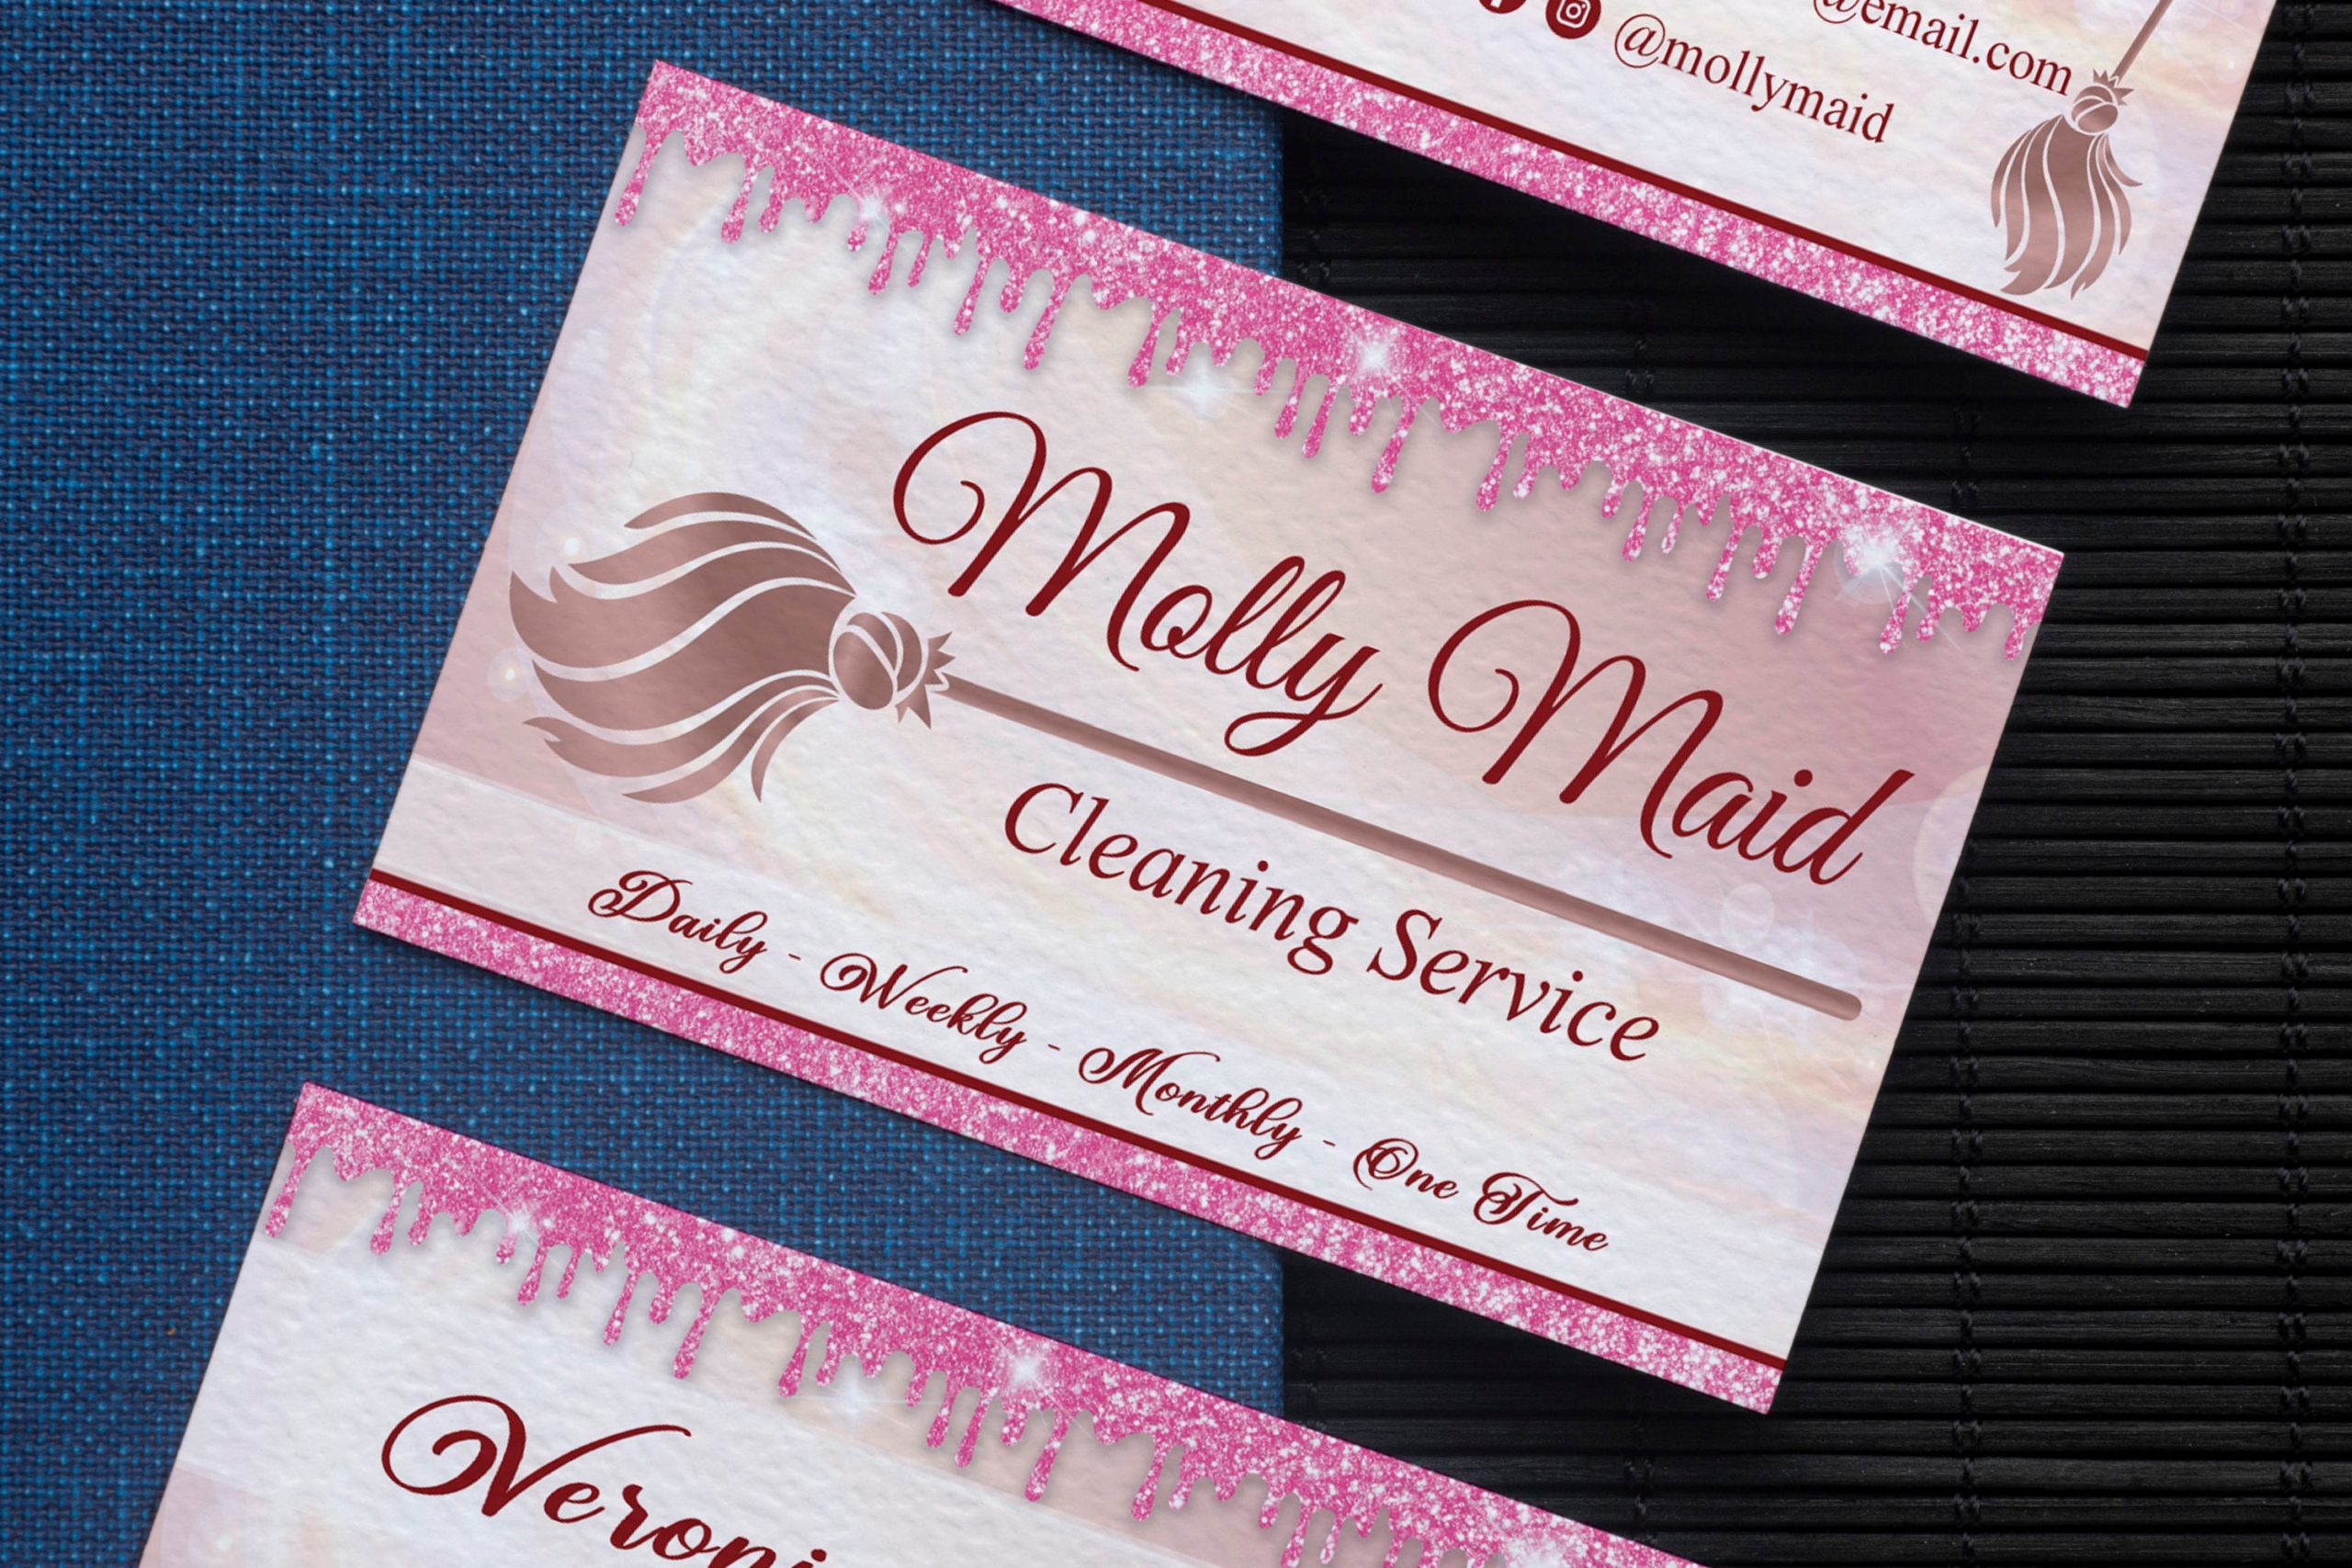 cleaning services business cards examples 3